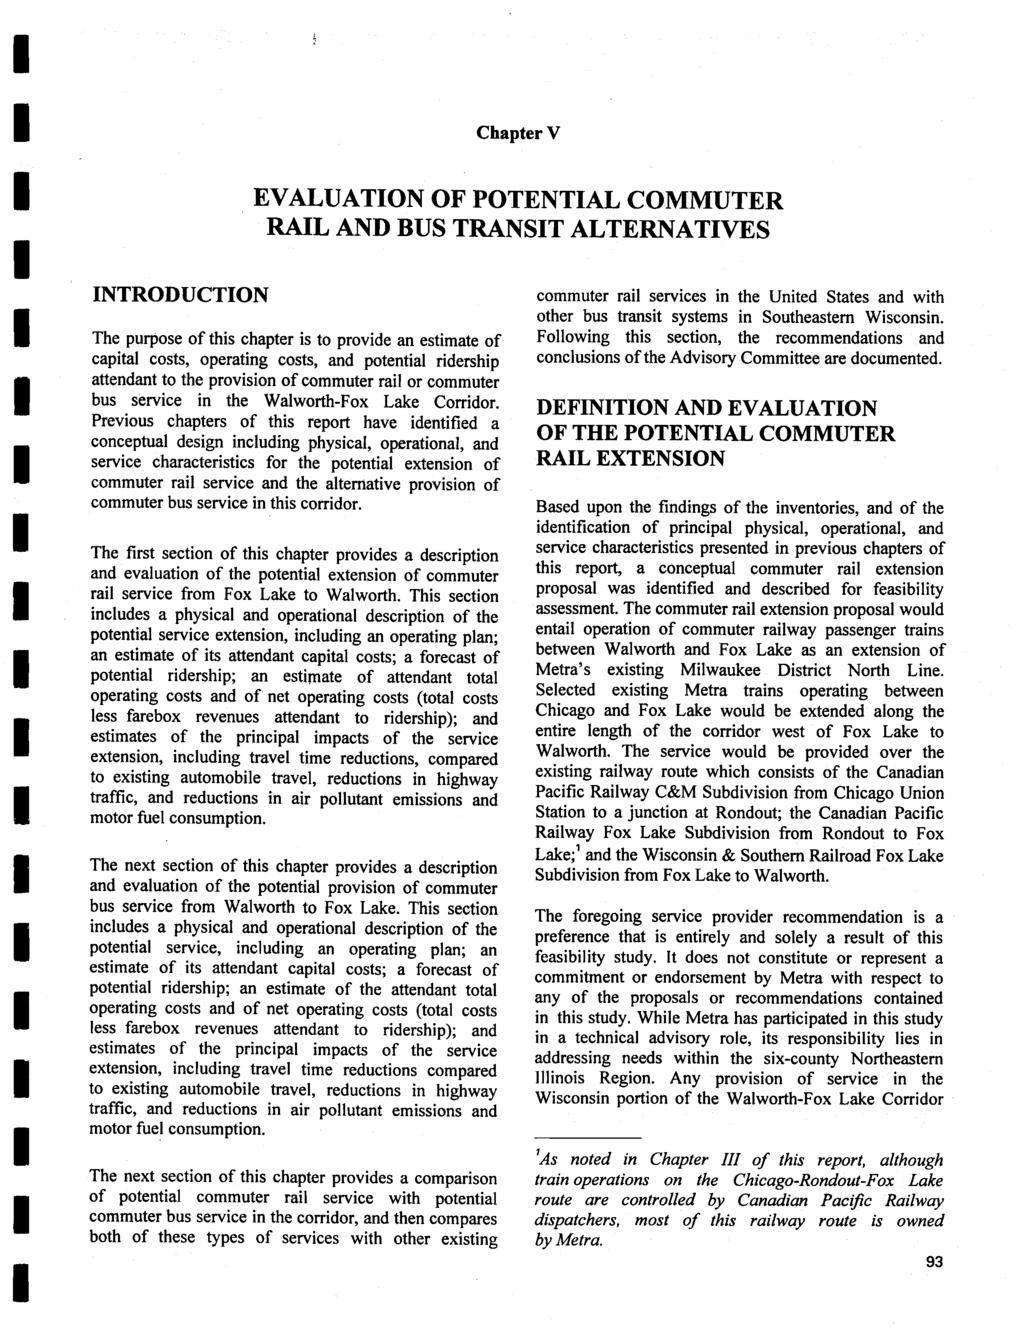 Chapter V EVALUATION OF POTENTIAL COMMUTER RAIL AND BUS TRANSIT ALTERNATIVES INTRODUCTION The purpose of this chapter is to provide an estimate of capital costs, operating costs, and potential